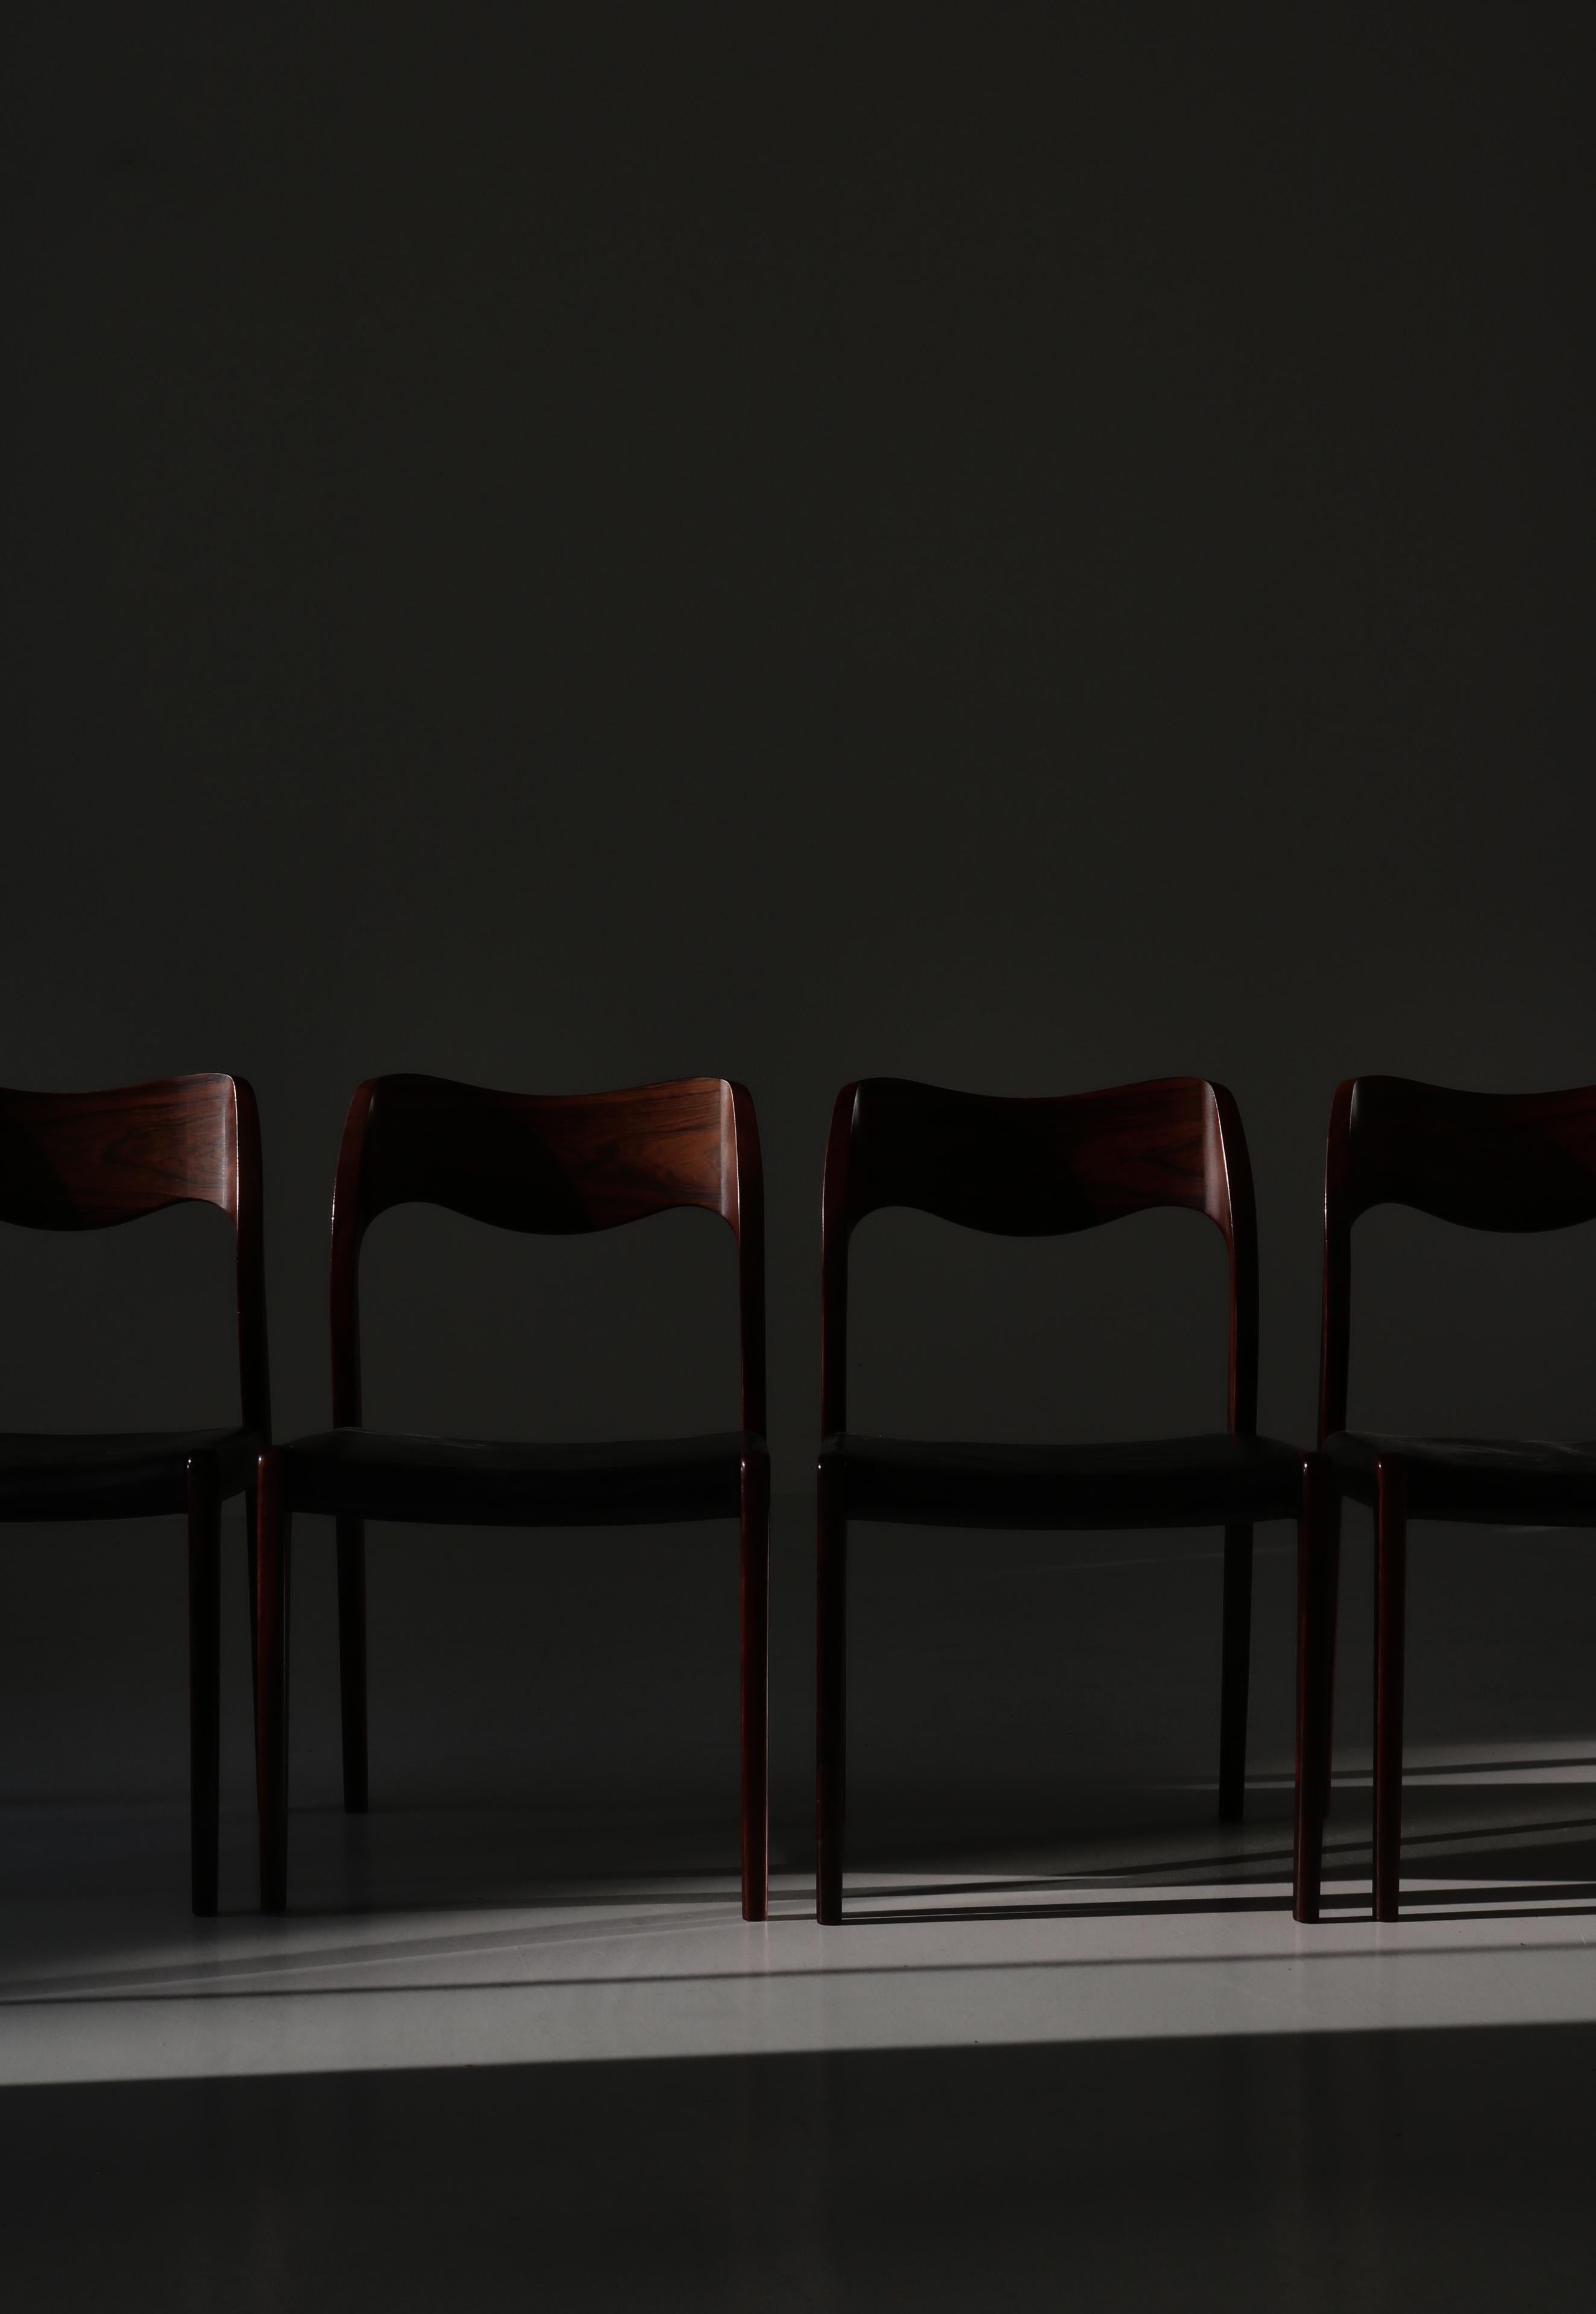 Set of 4 Danish Modern dining chairs by Niels Otto Møller (N.O. Møller) made in the 1950s at J.L. Møllers Møbelfabrik, Denmark. The chairs are made in the most beautiful solid rosewood and retains the original black leather. Marked by maker.

The